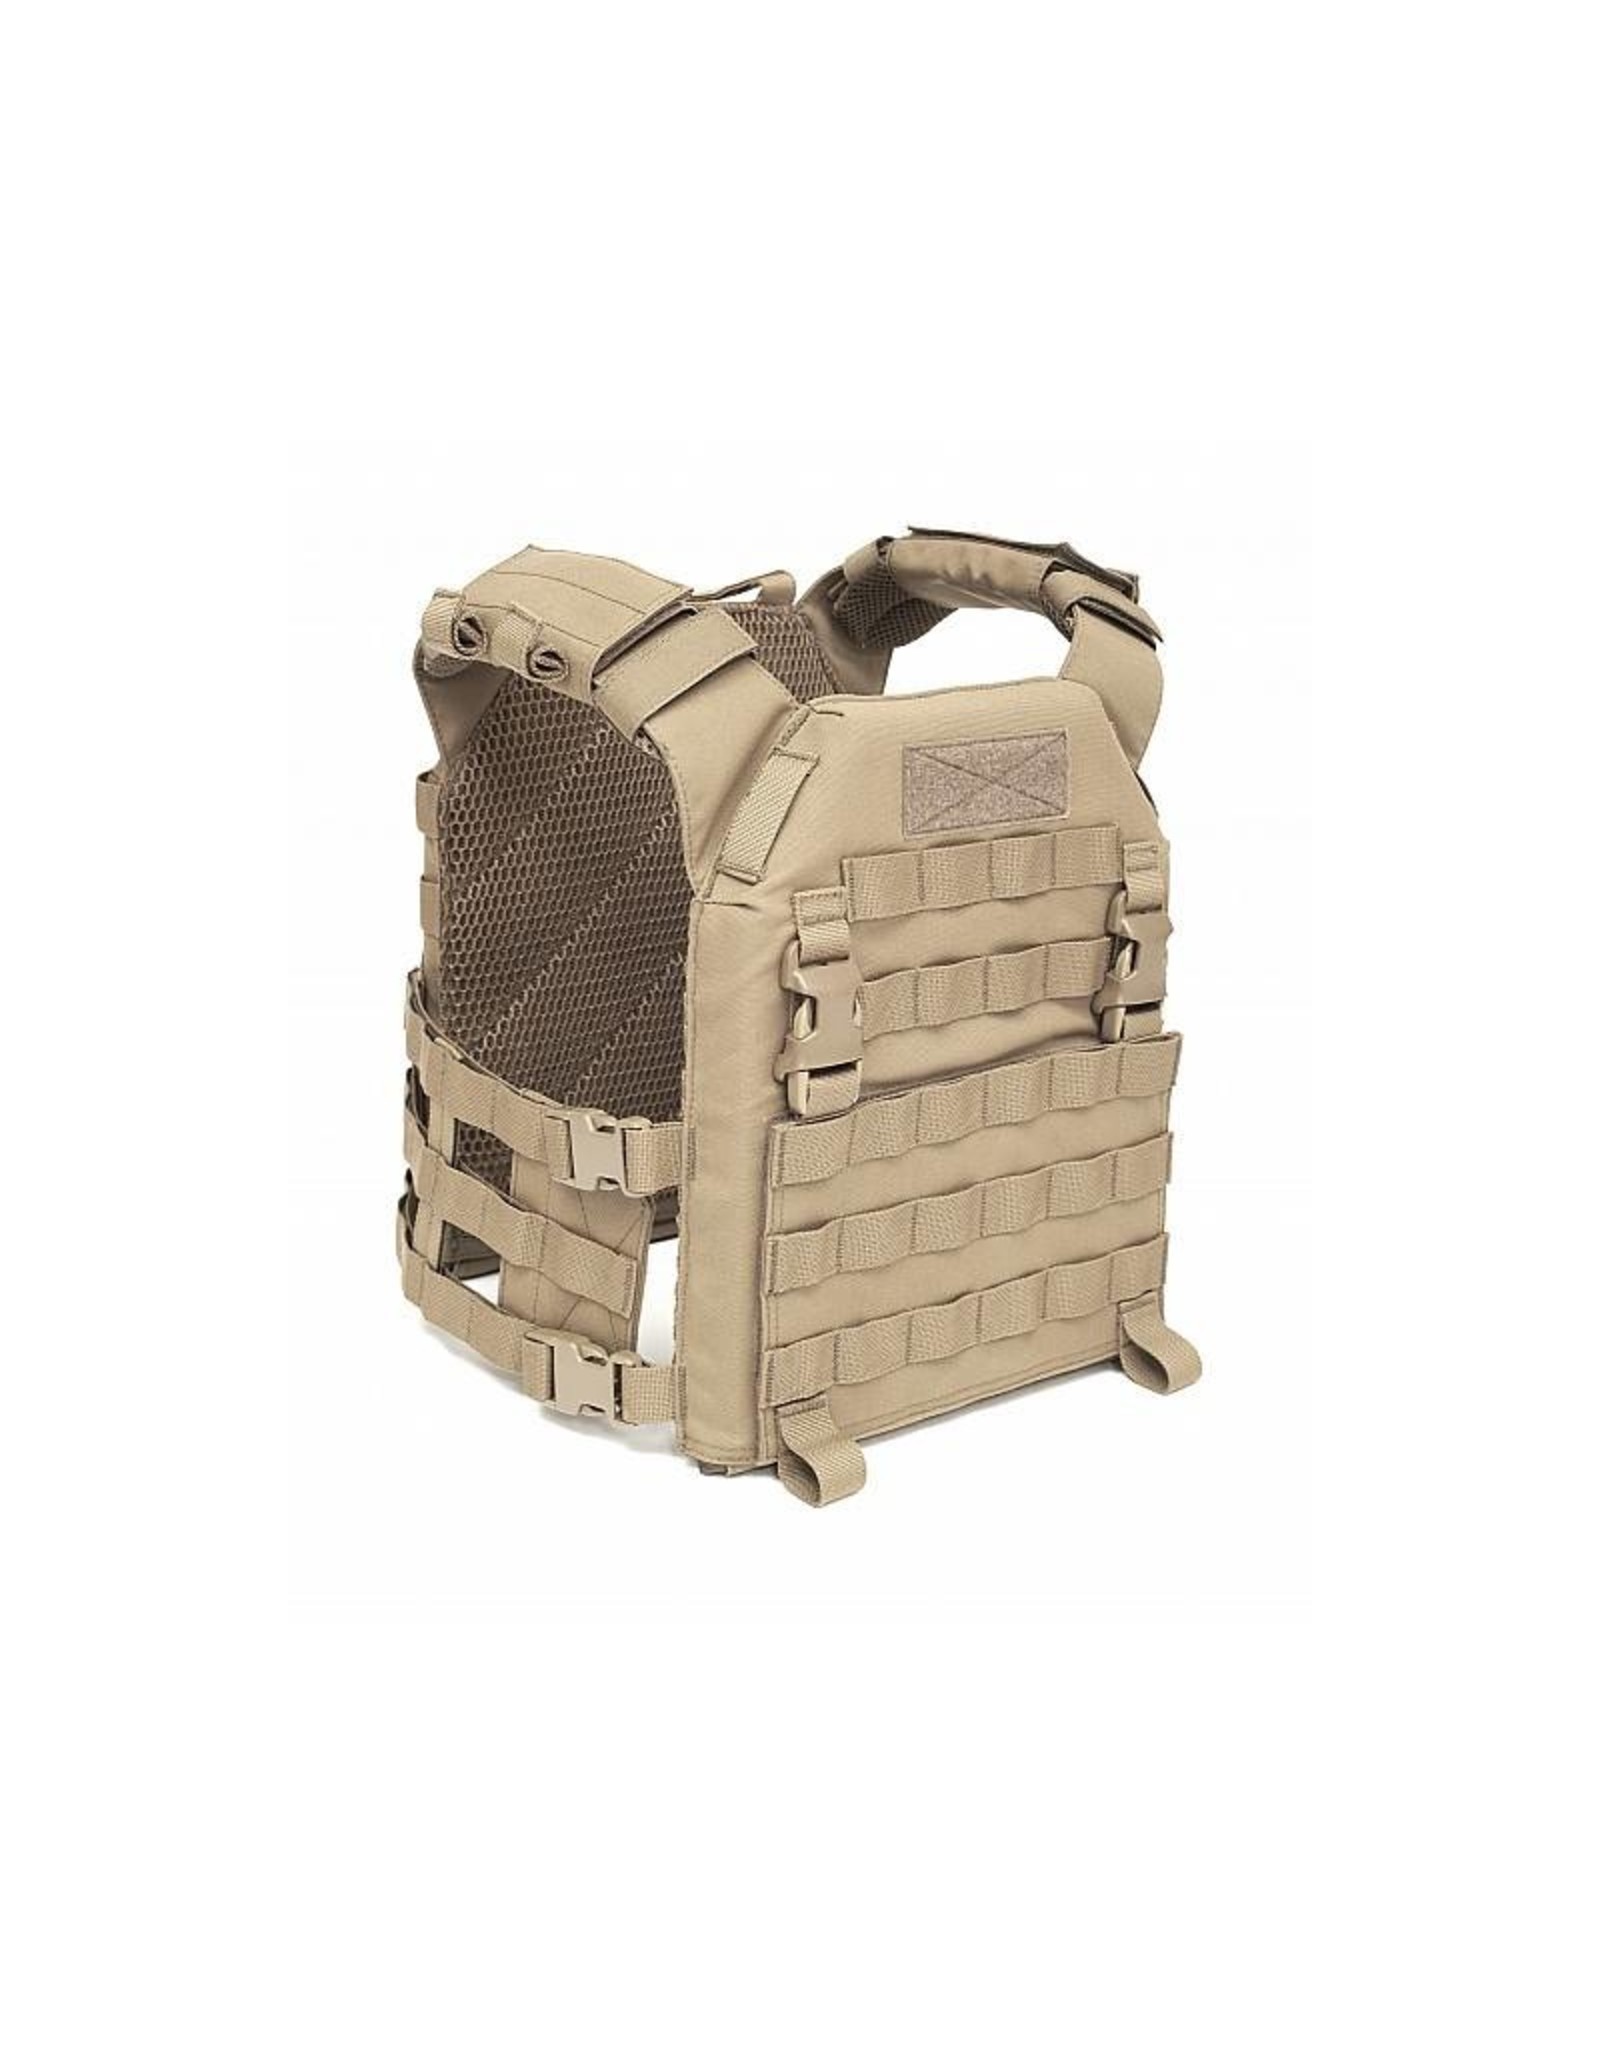 Warrior Recon Plate Carrier w Pathfinder Chest Rig - Coyote Tan